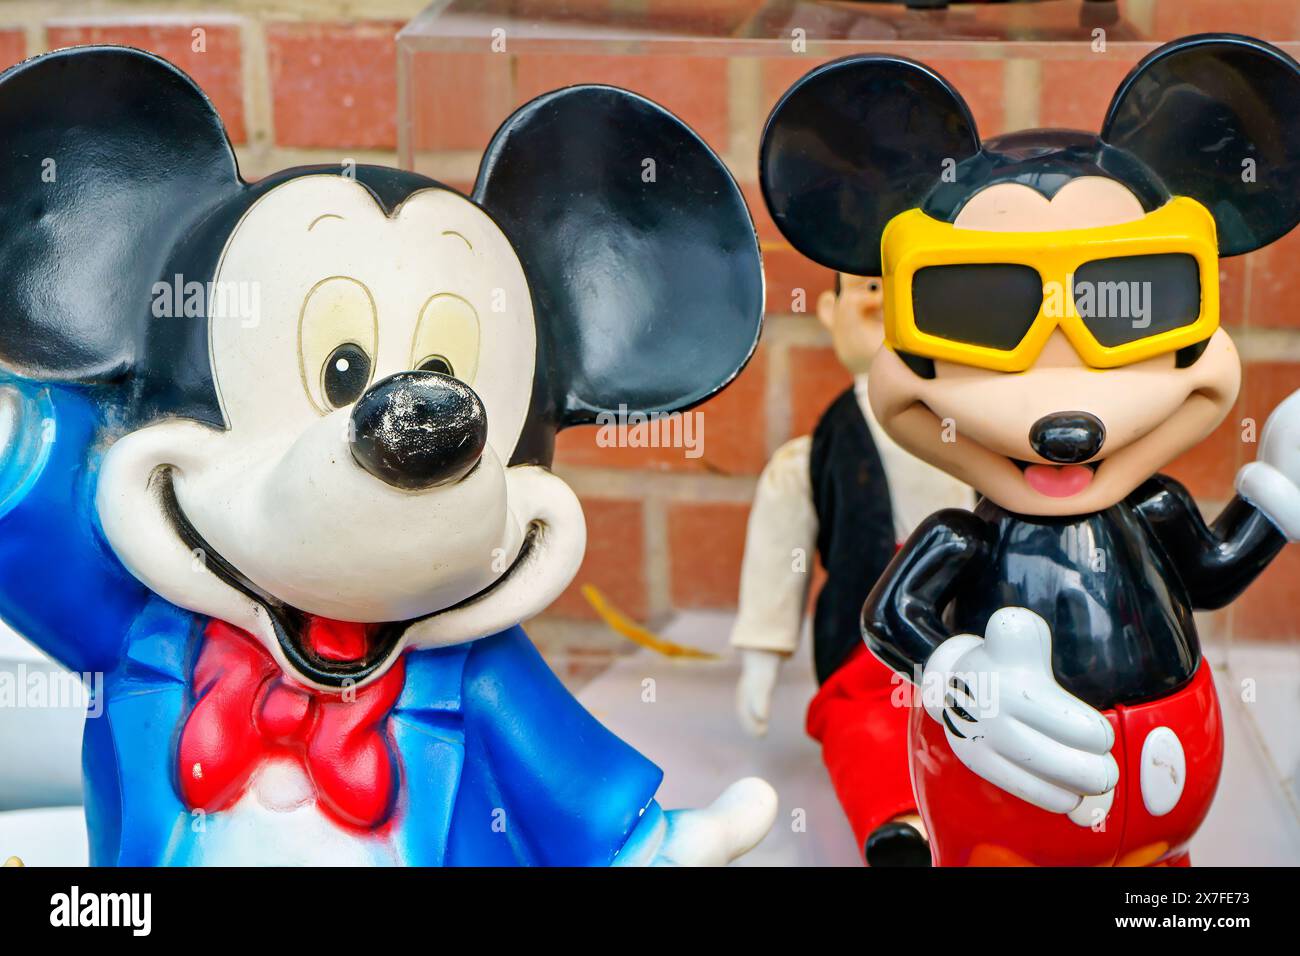 Hamburg, Germany, March 23, 2019: Vintage Mickey Mouse Figurines Displayed at a Flea Market Stock Photo